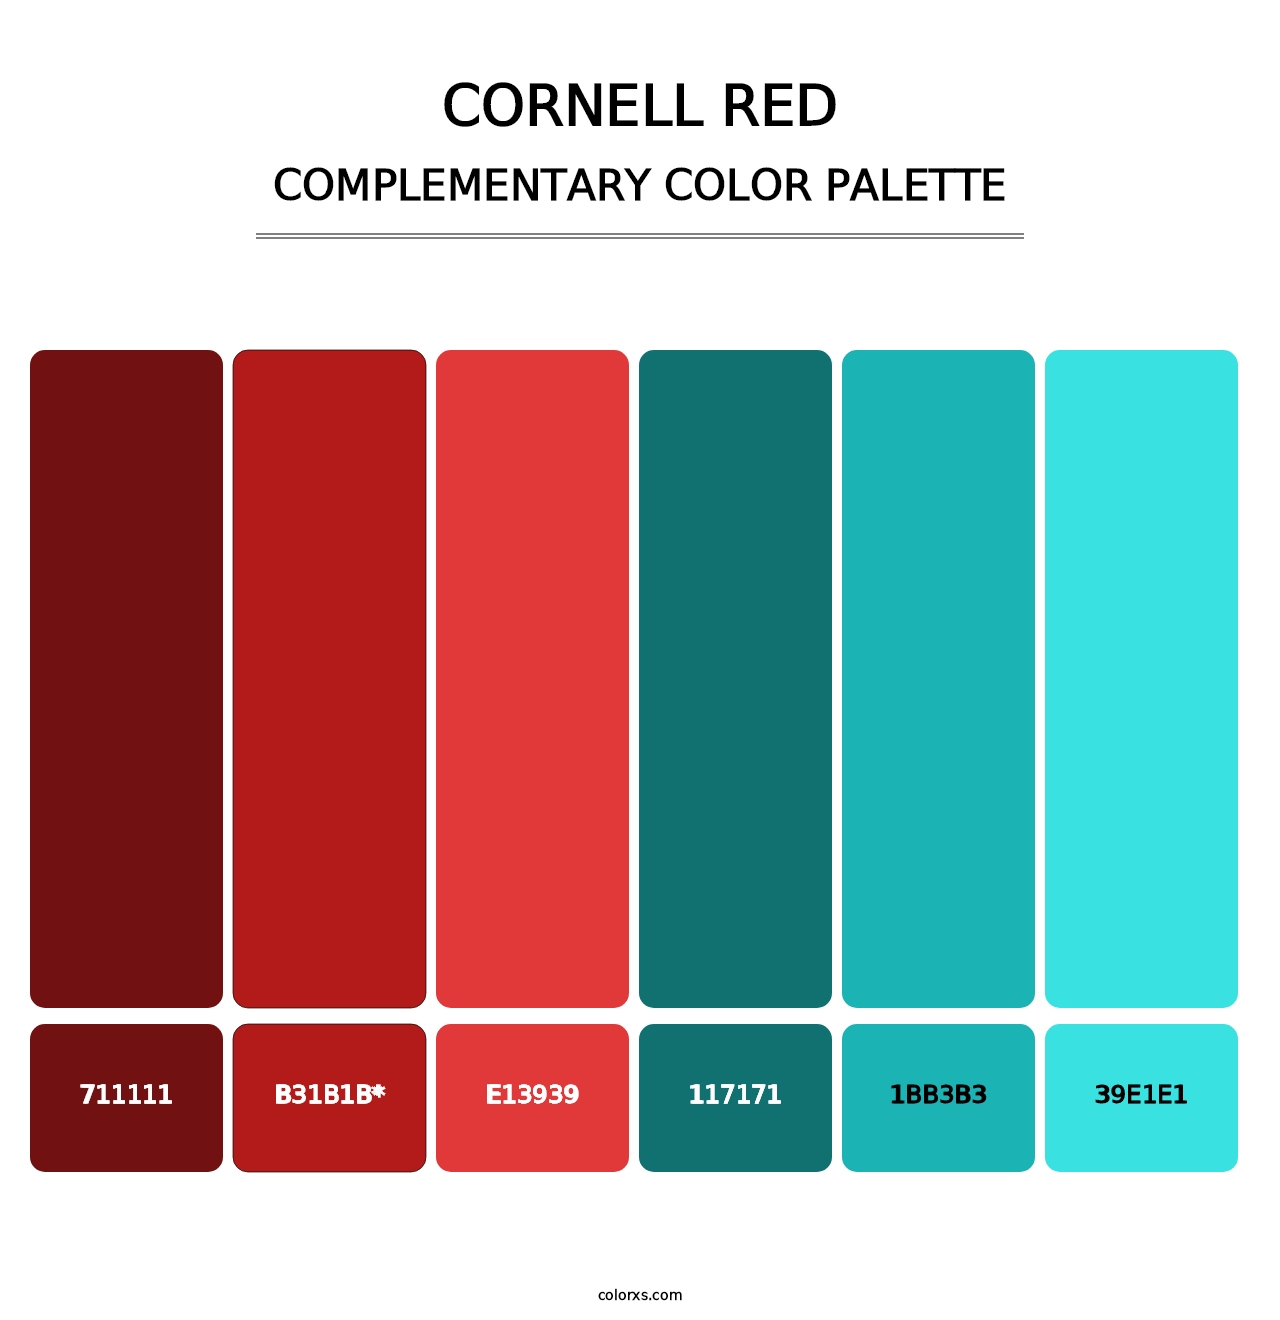 Cornell Red - Complementary Color Palette